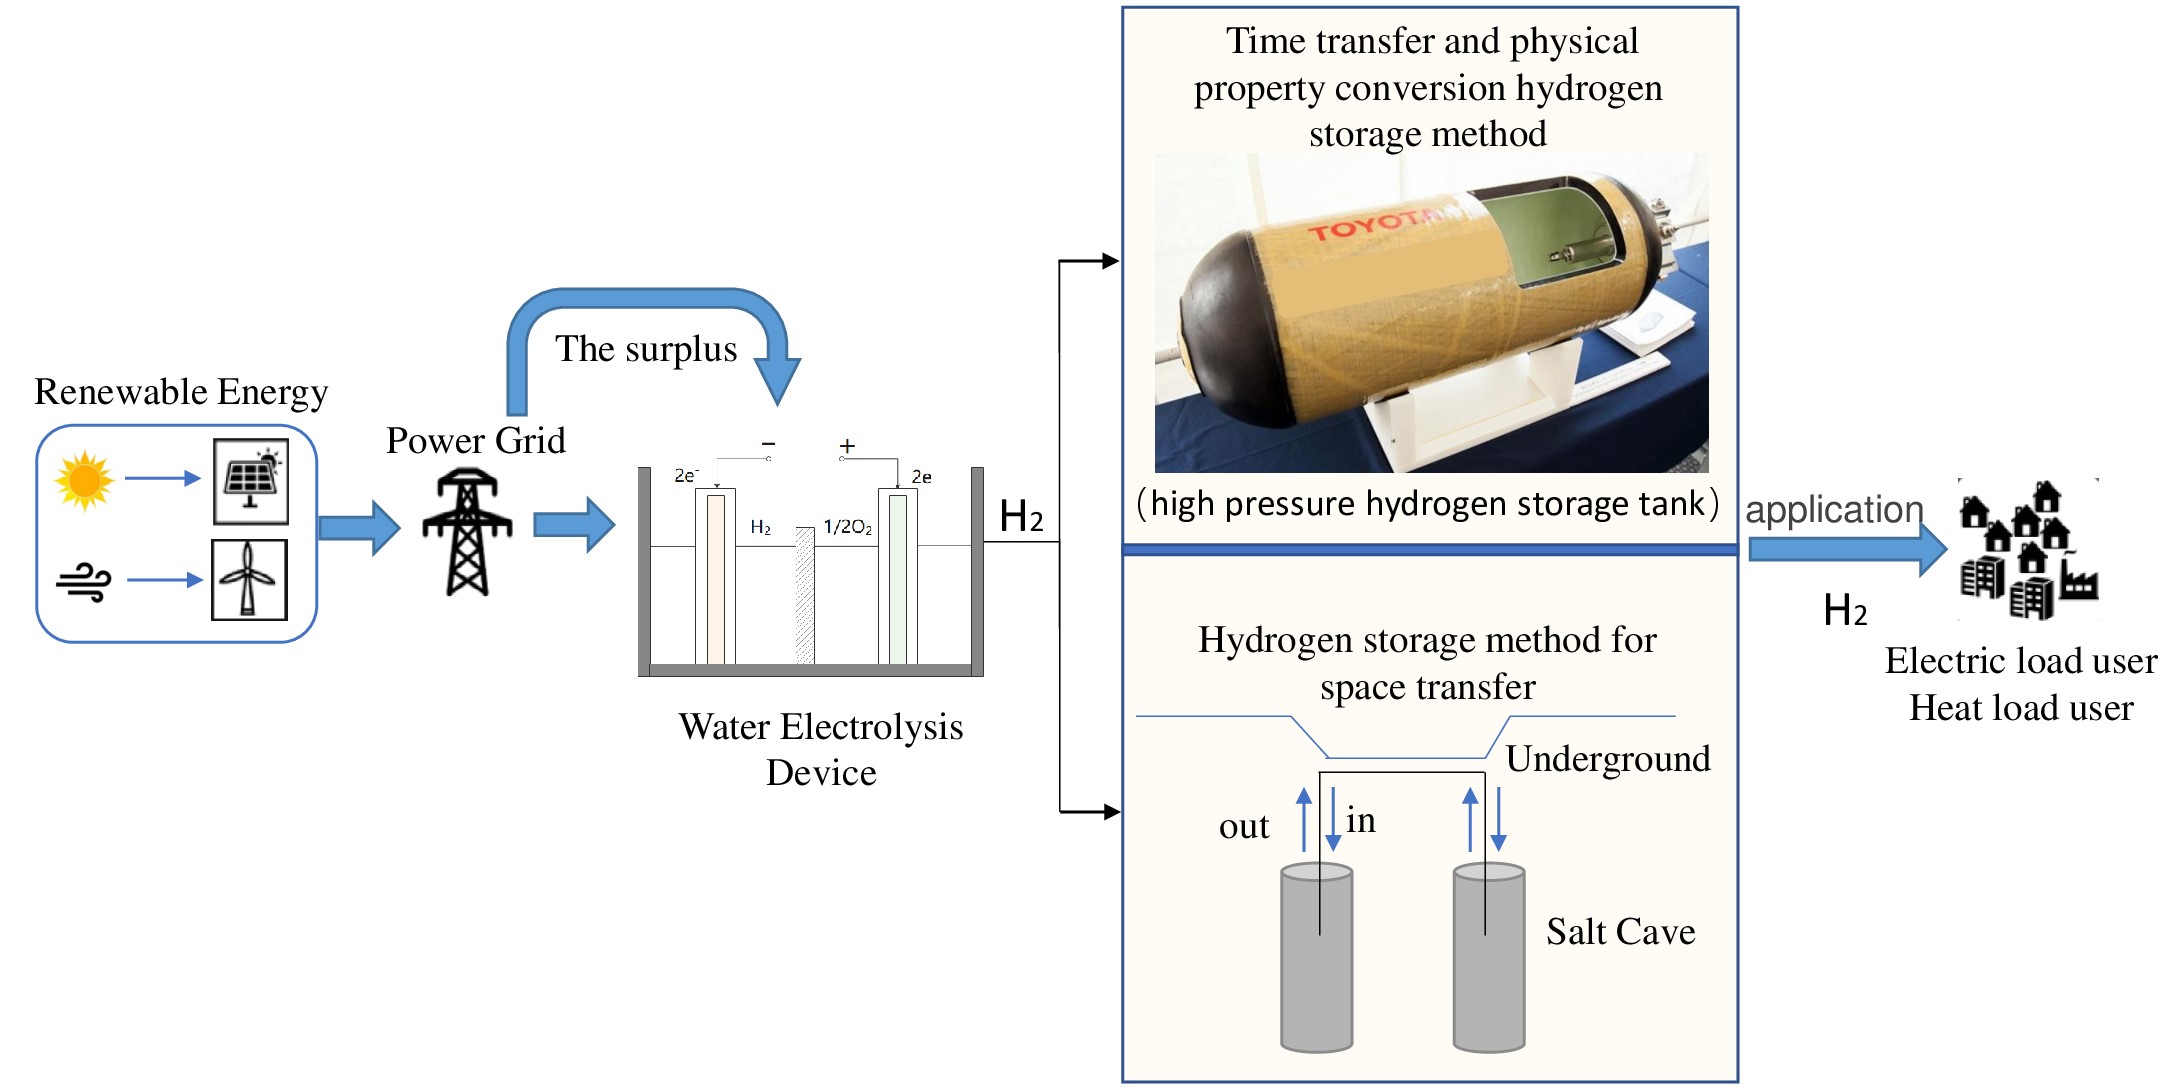 A Review of Seasonal Hydrogen Storage Multi-Energy Systems Based on Temporal and Spatial Characteristics